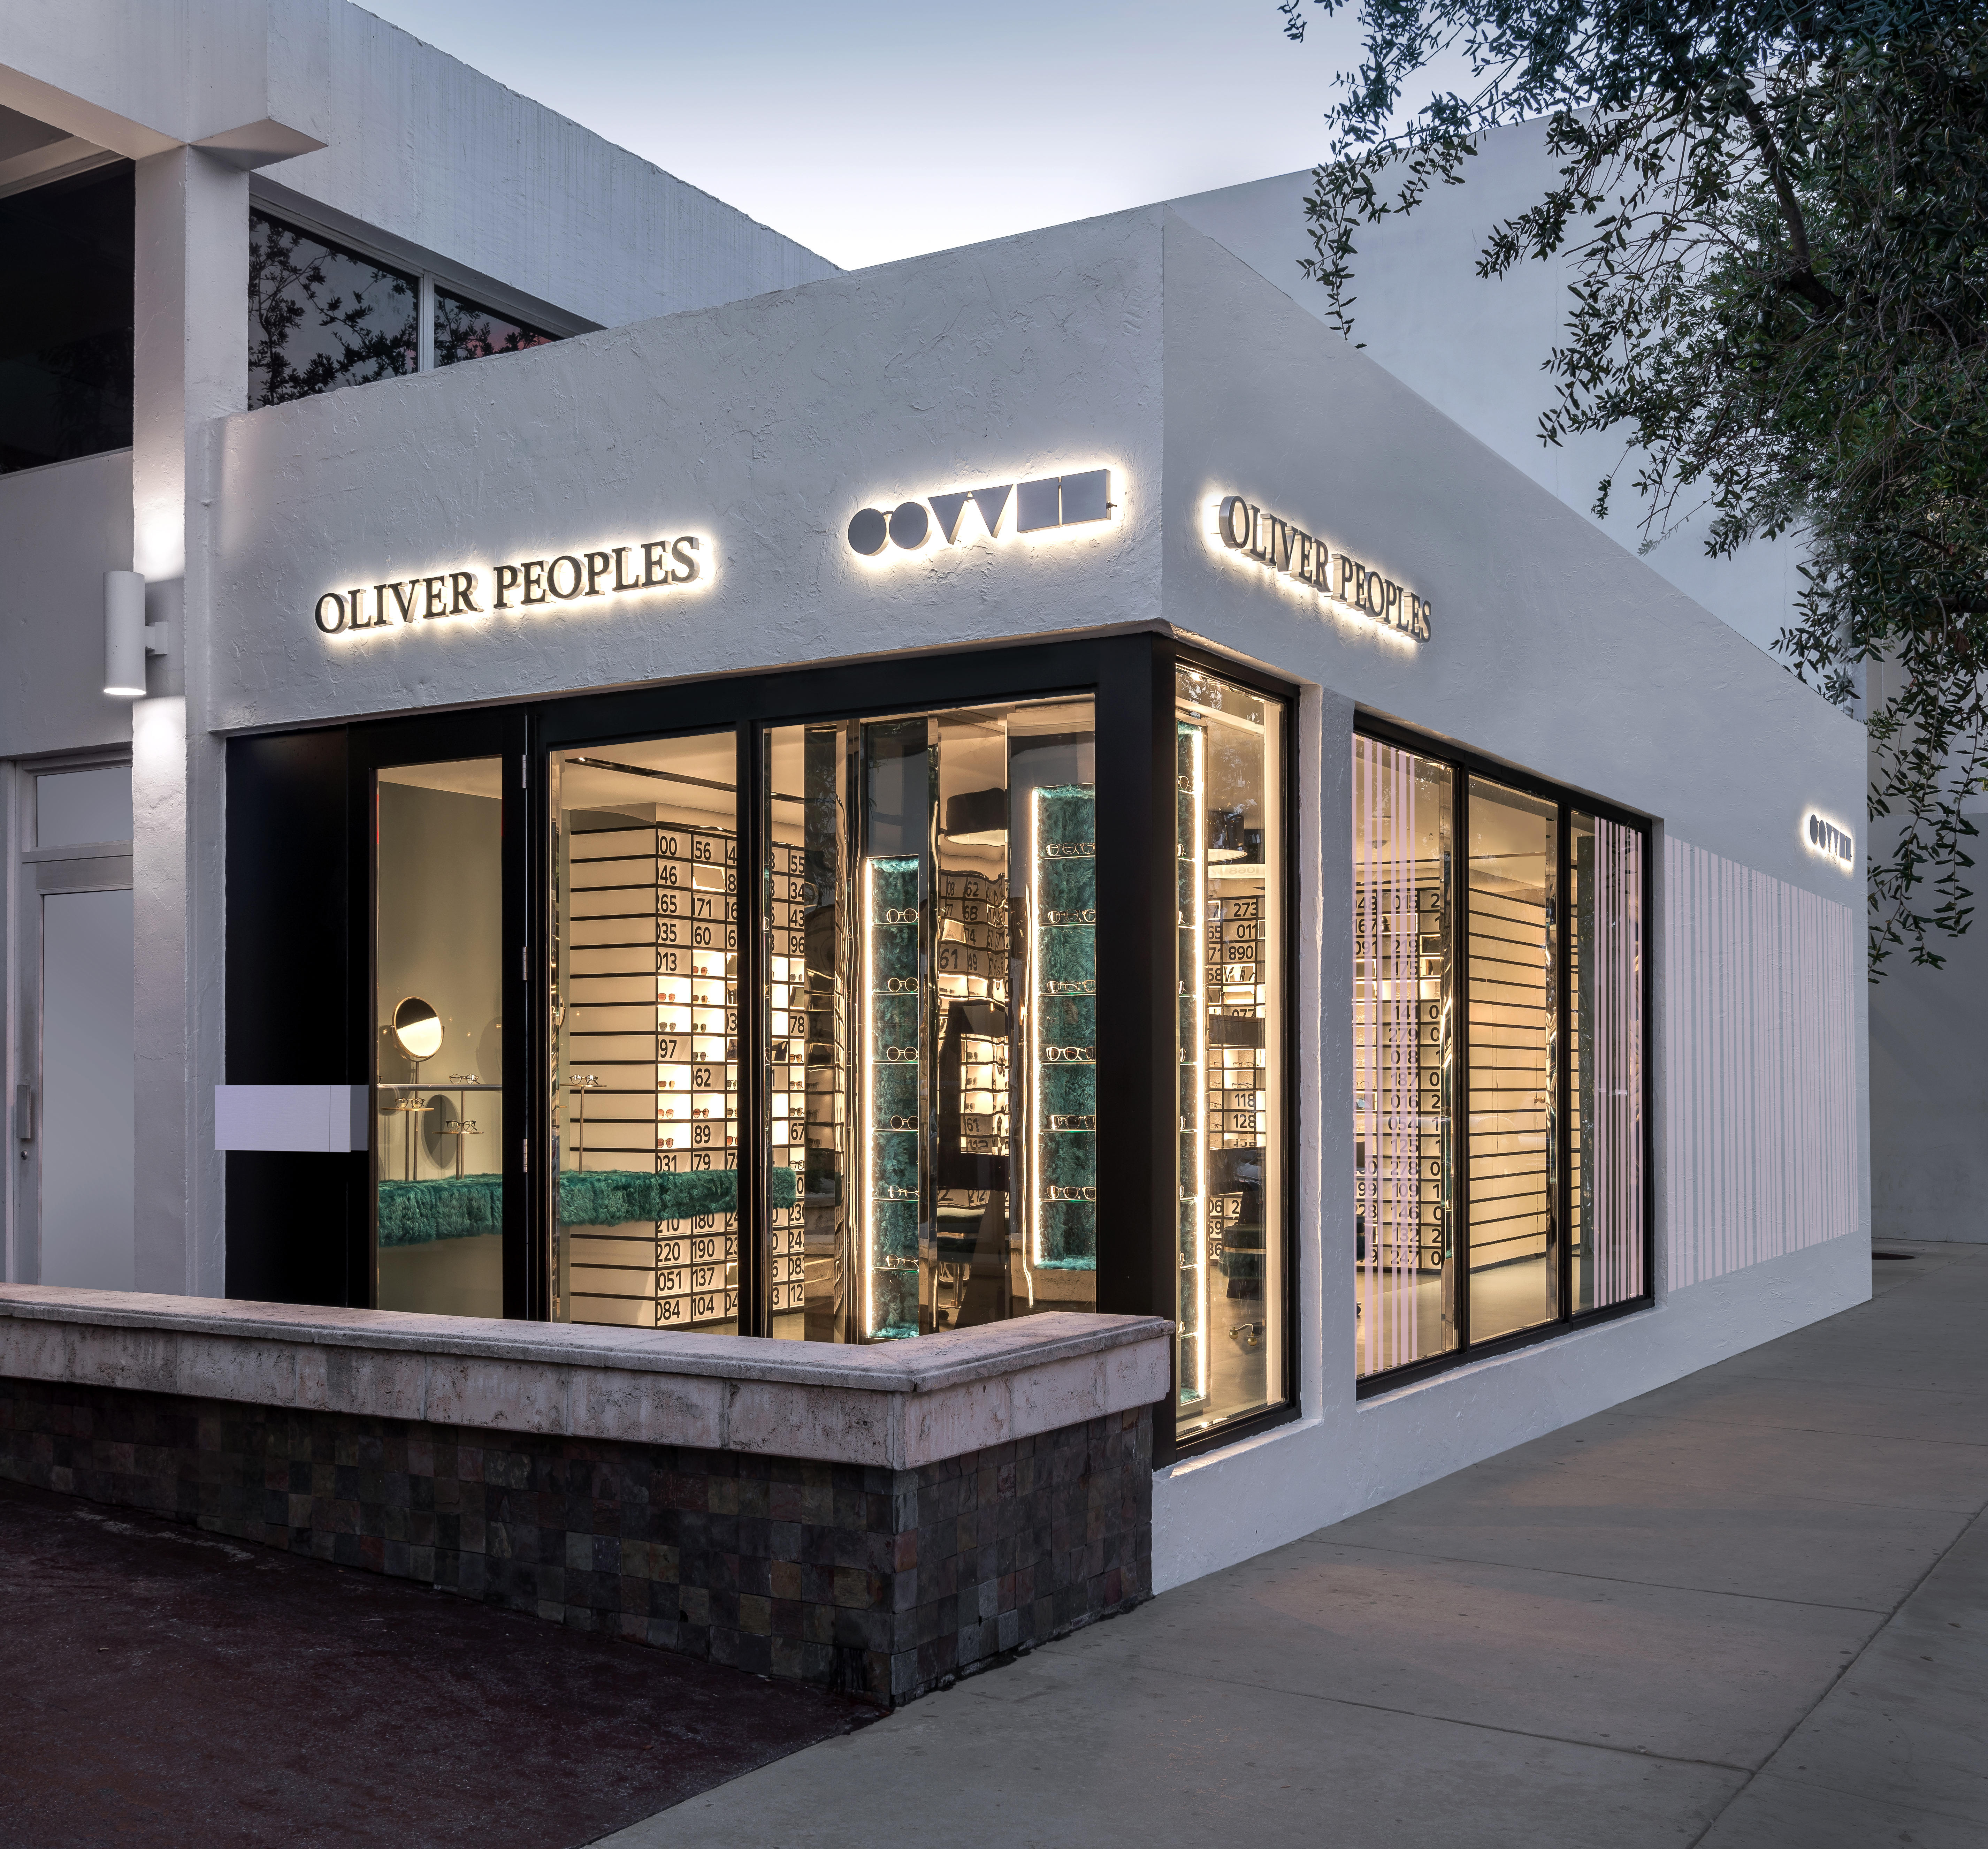 Oliver Peoples Miami (305)576-6759